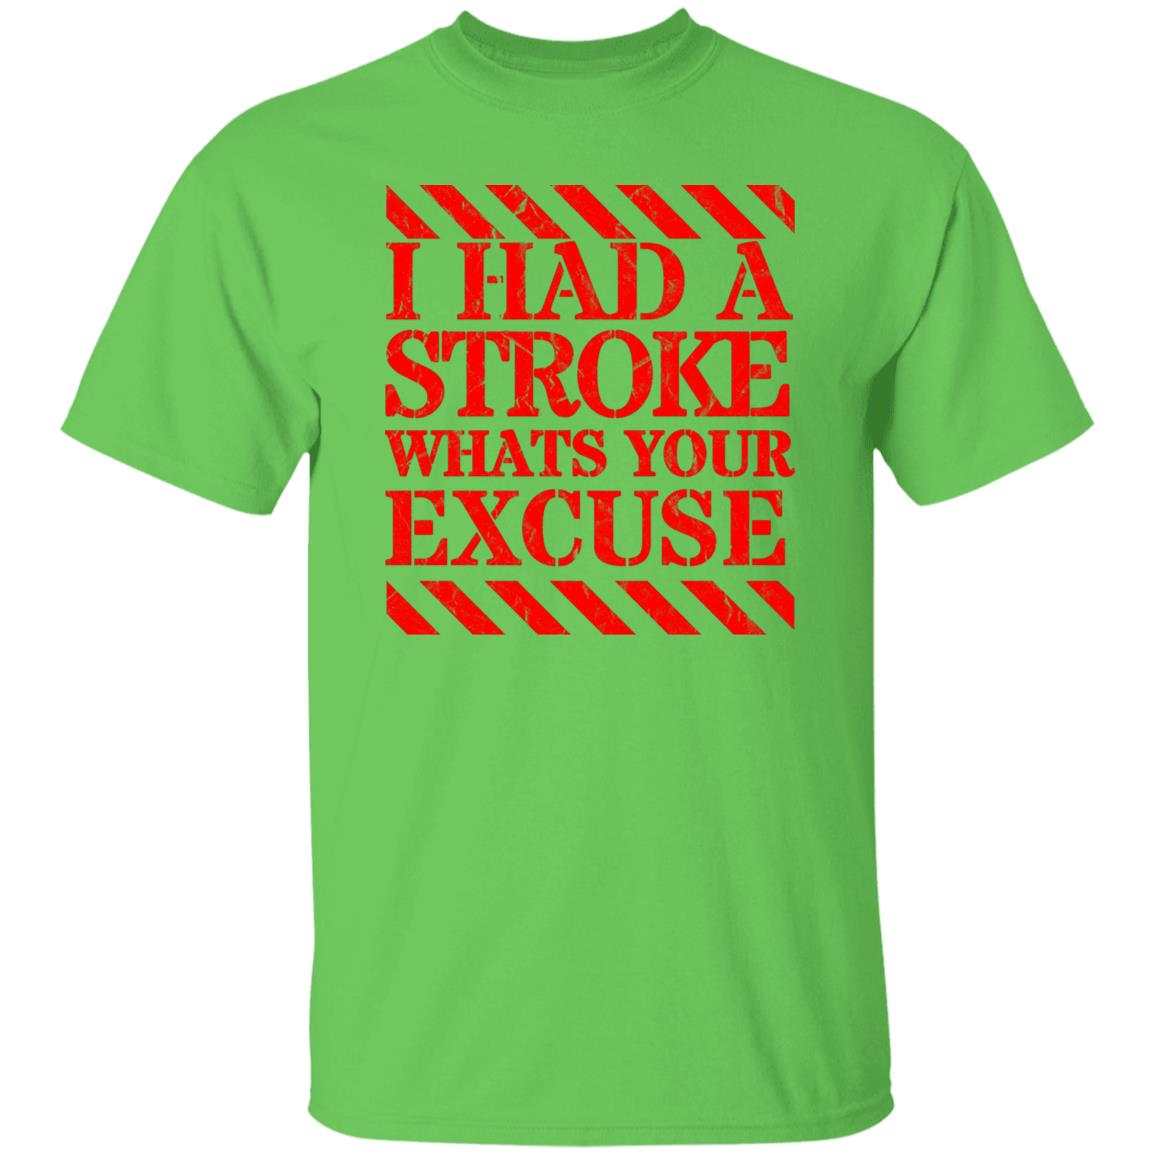 I had a stroke what's your excuse T-Shirt Red - Expressive DeZien 